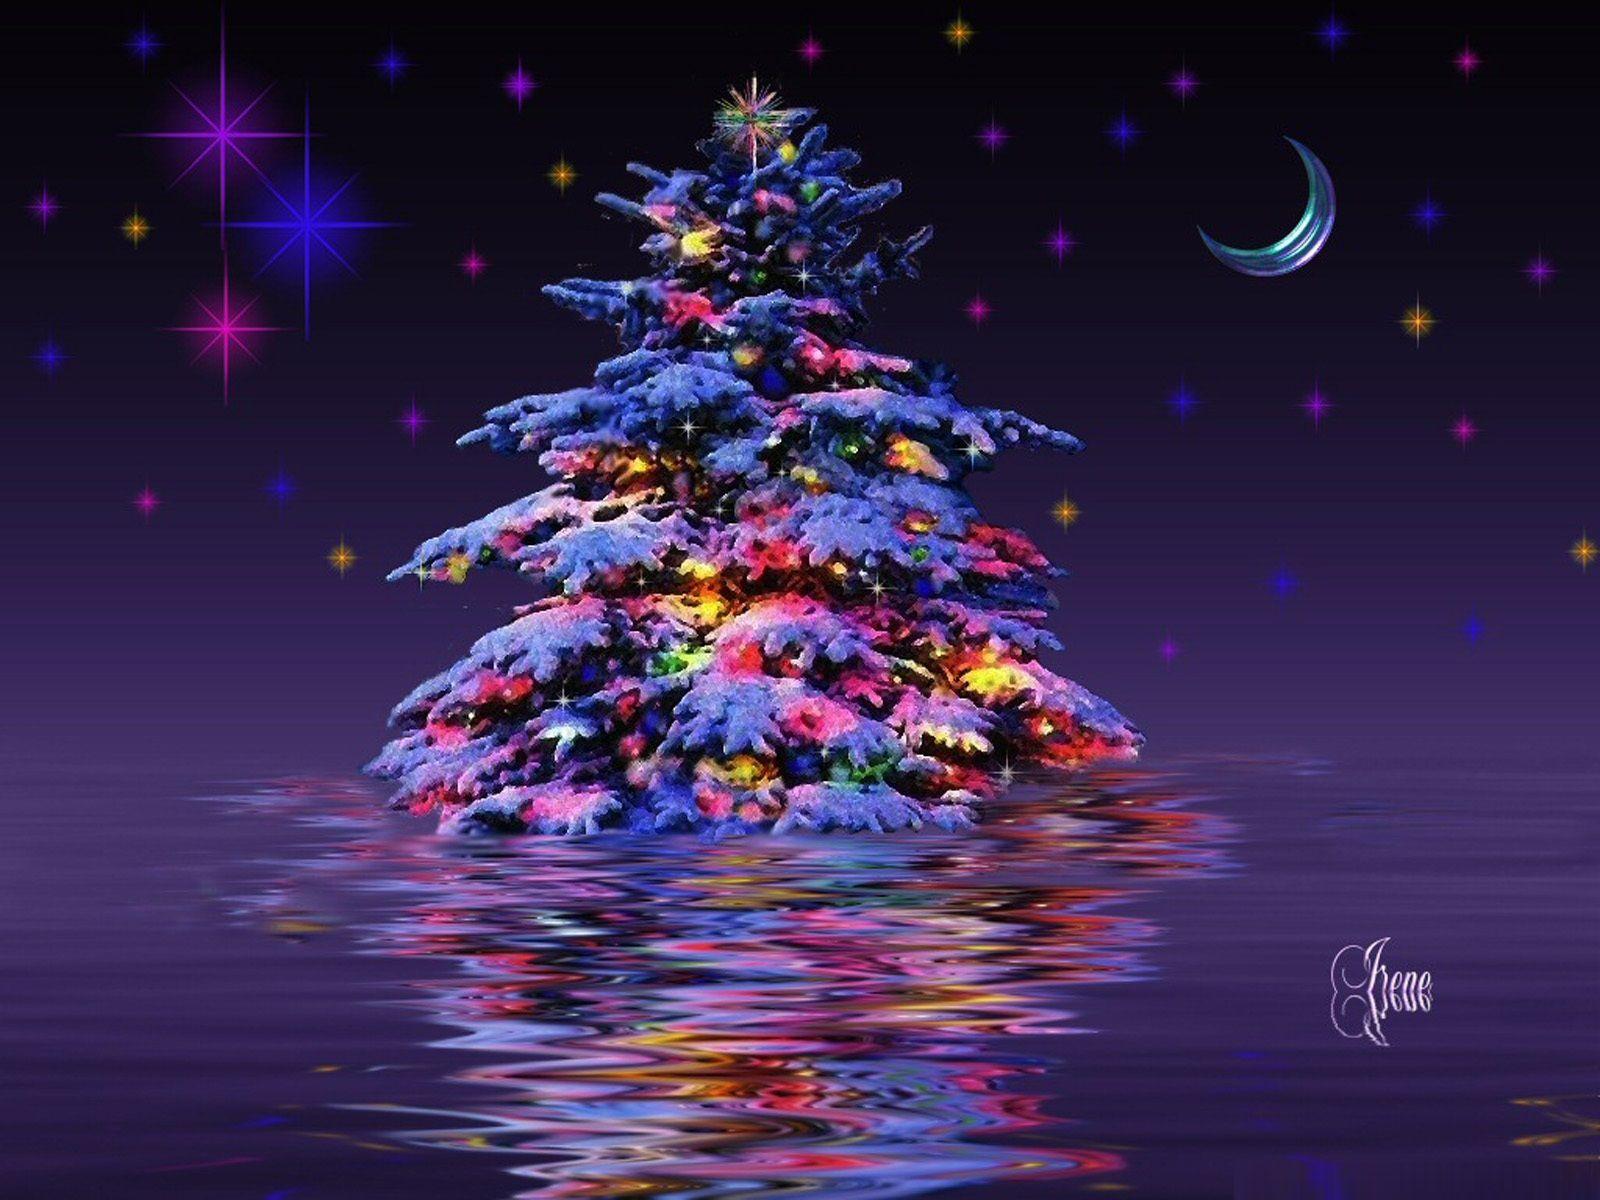 Free 3 D Christmas Background. tree wallpaper your selected image as your desktop wa. Christmas tree picture, Christmas tree wallpaper, Animated christmas tree